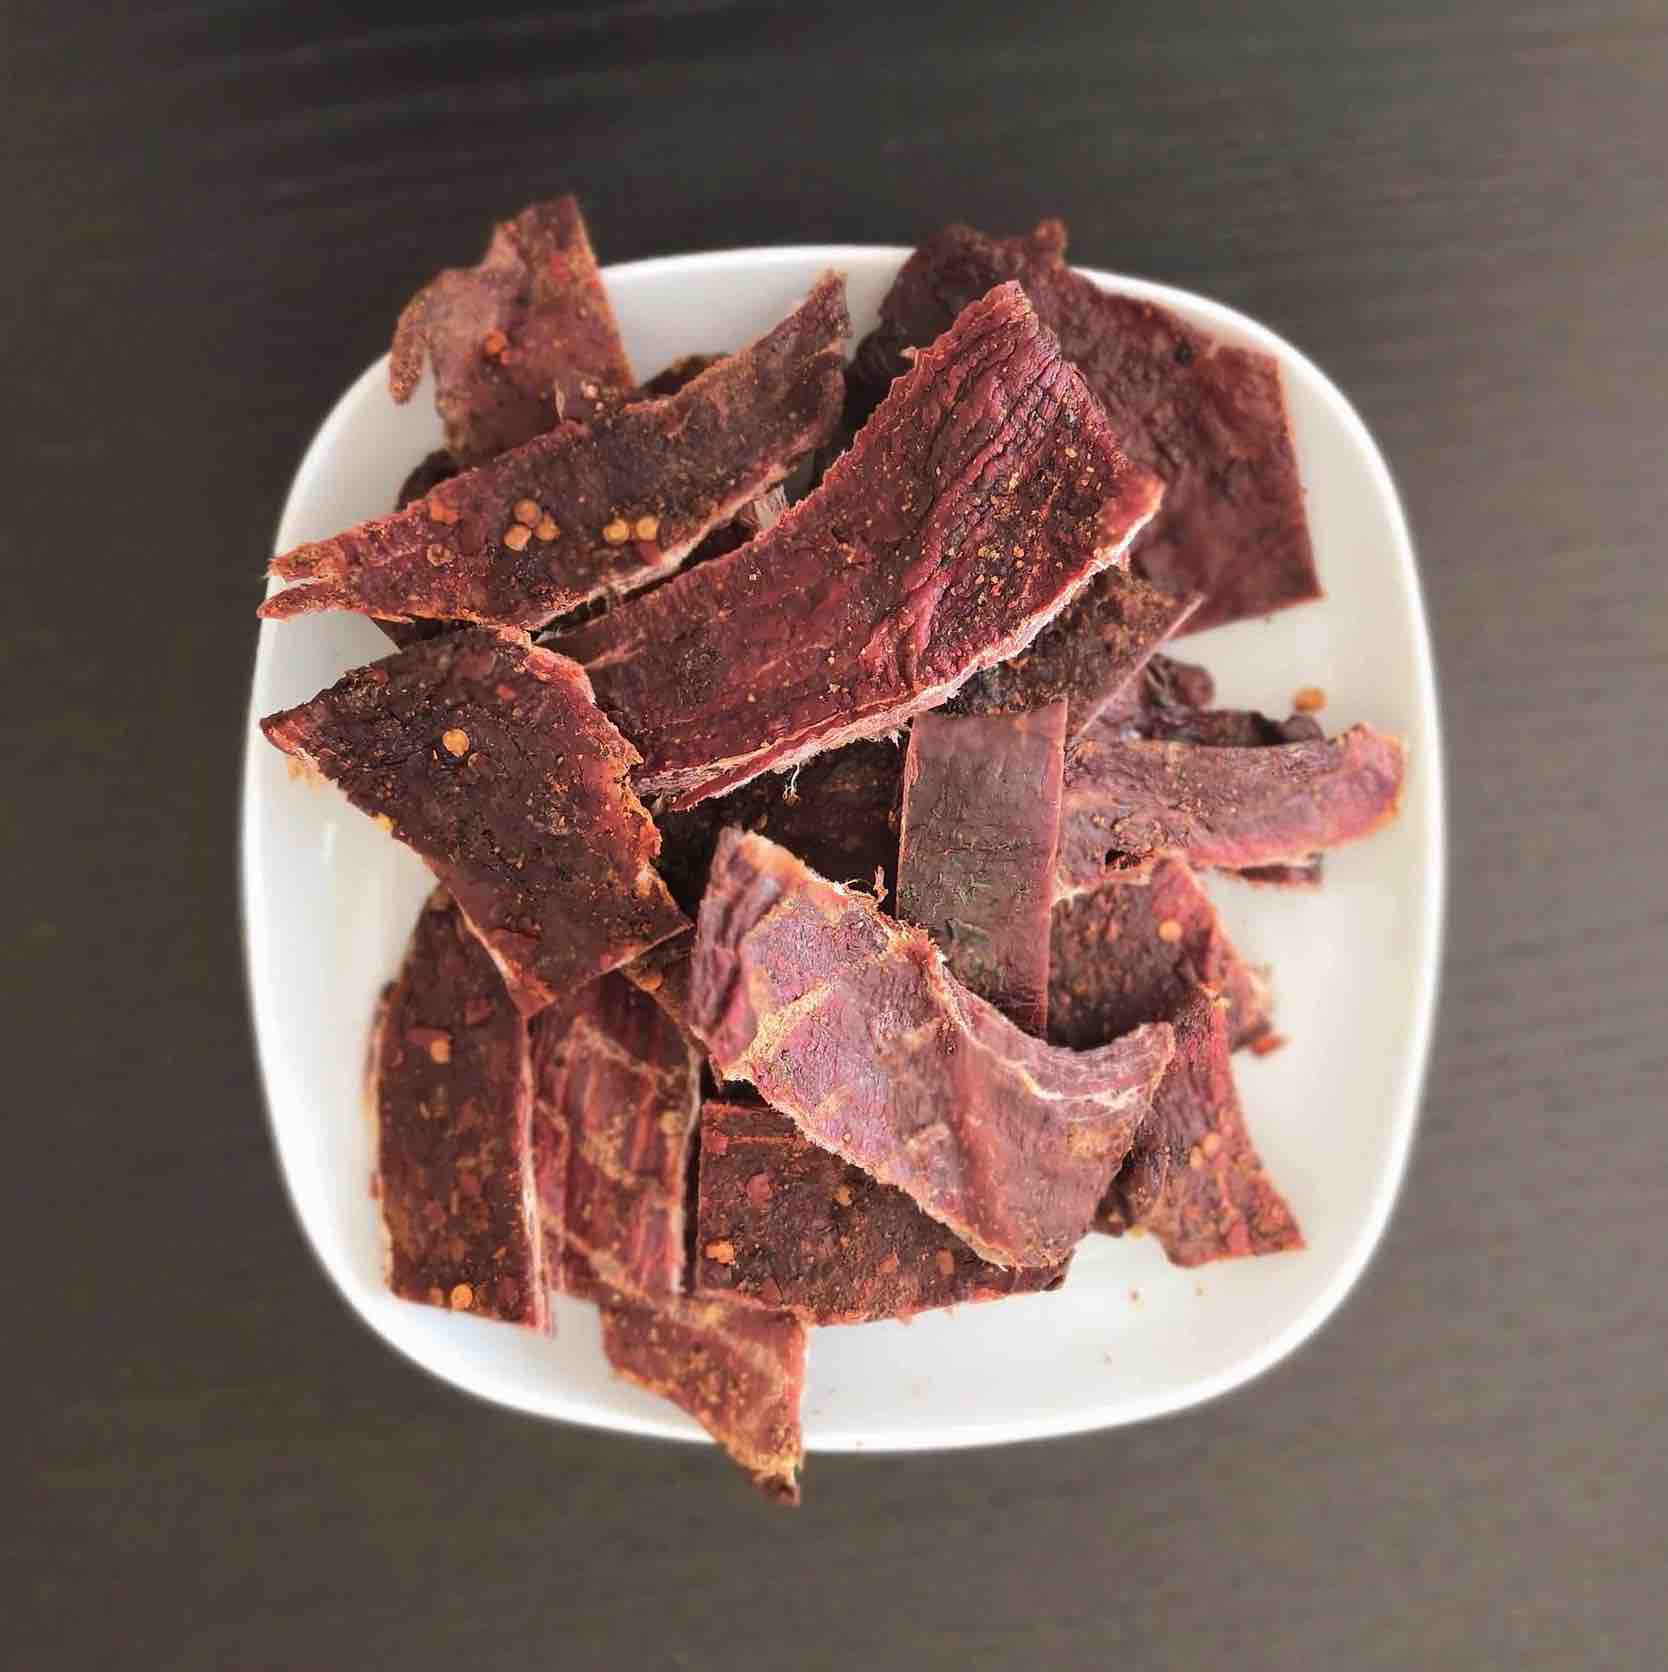 EastEnd Meats & Sausage Best Beef Jerky in Winnipeg; 22 Flavours & High in Protein. Standard shipping across MB. Sugar Free Selection Available